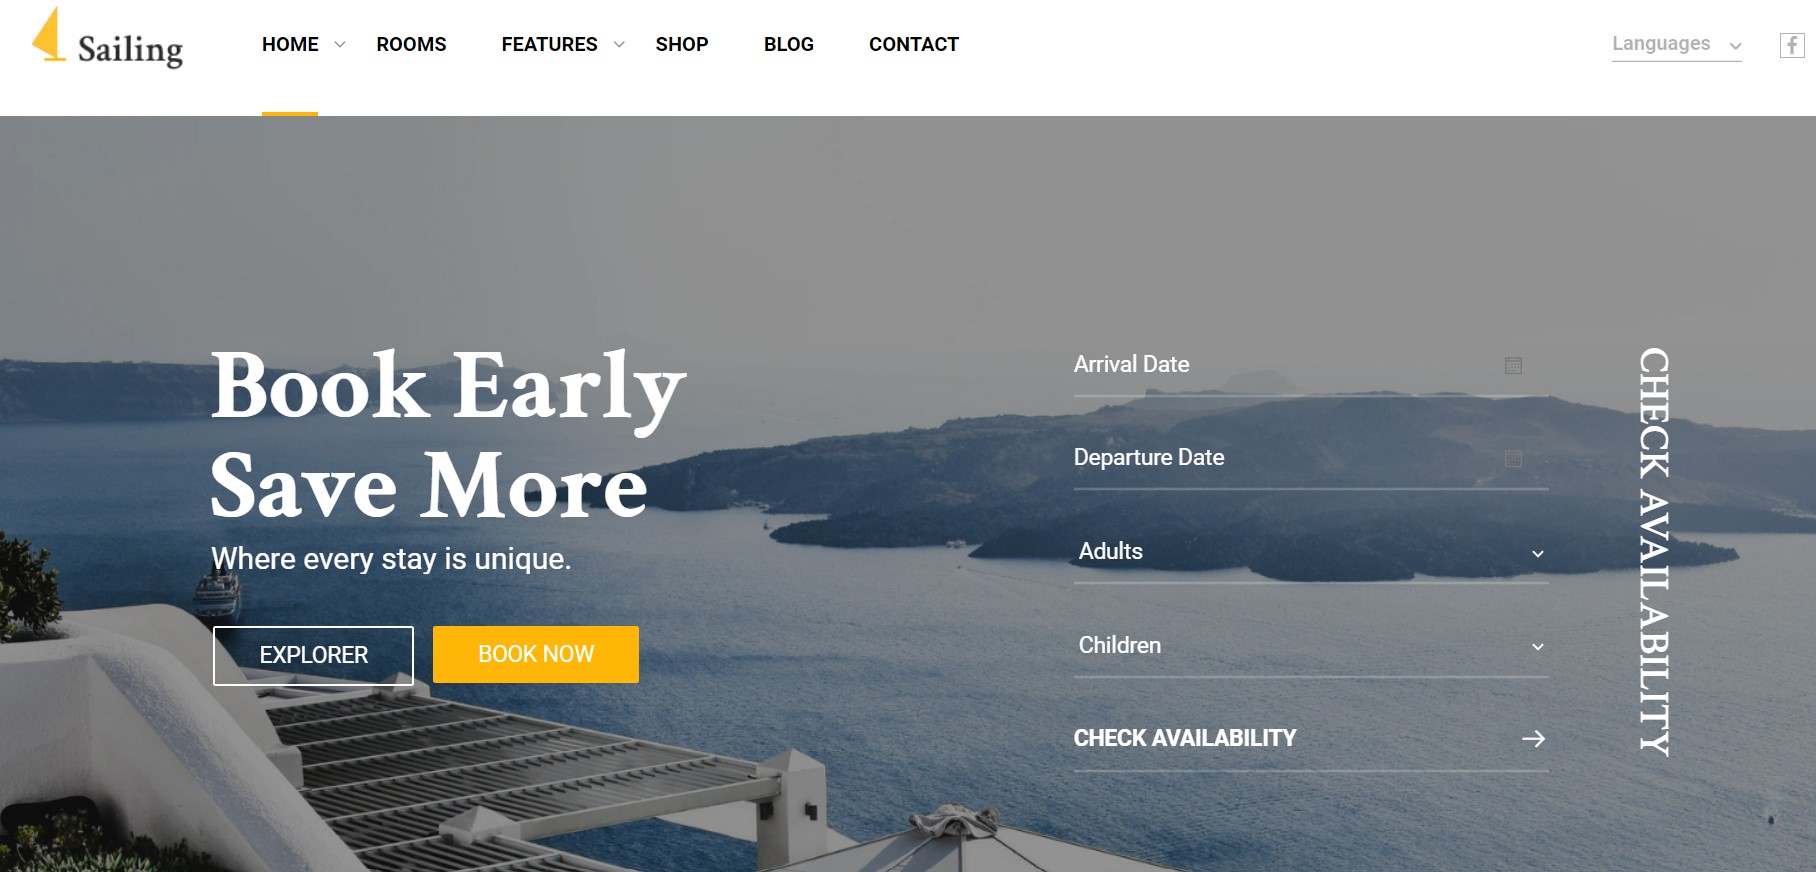 sailling travel agency wordpress theme for hotel